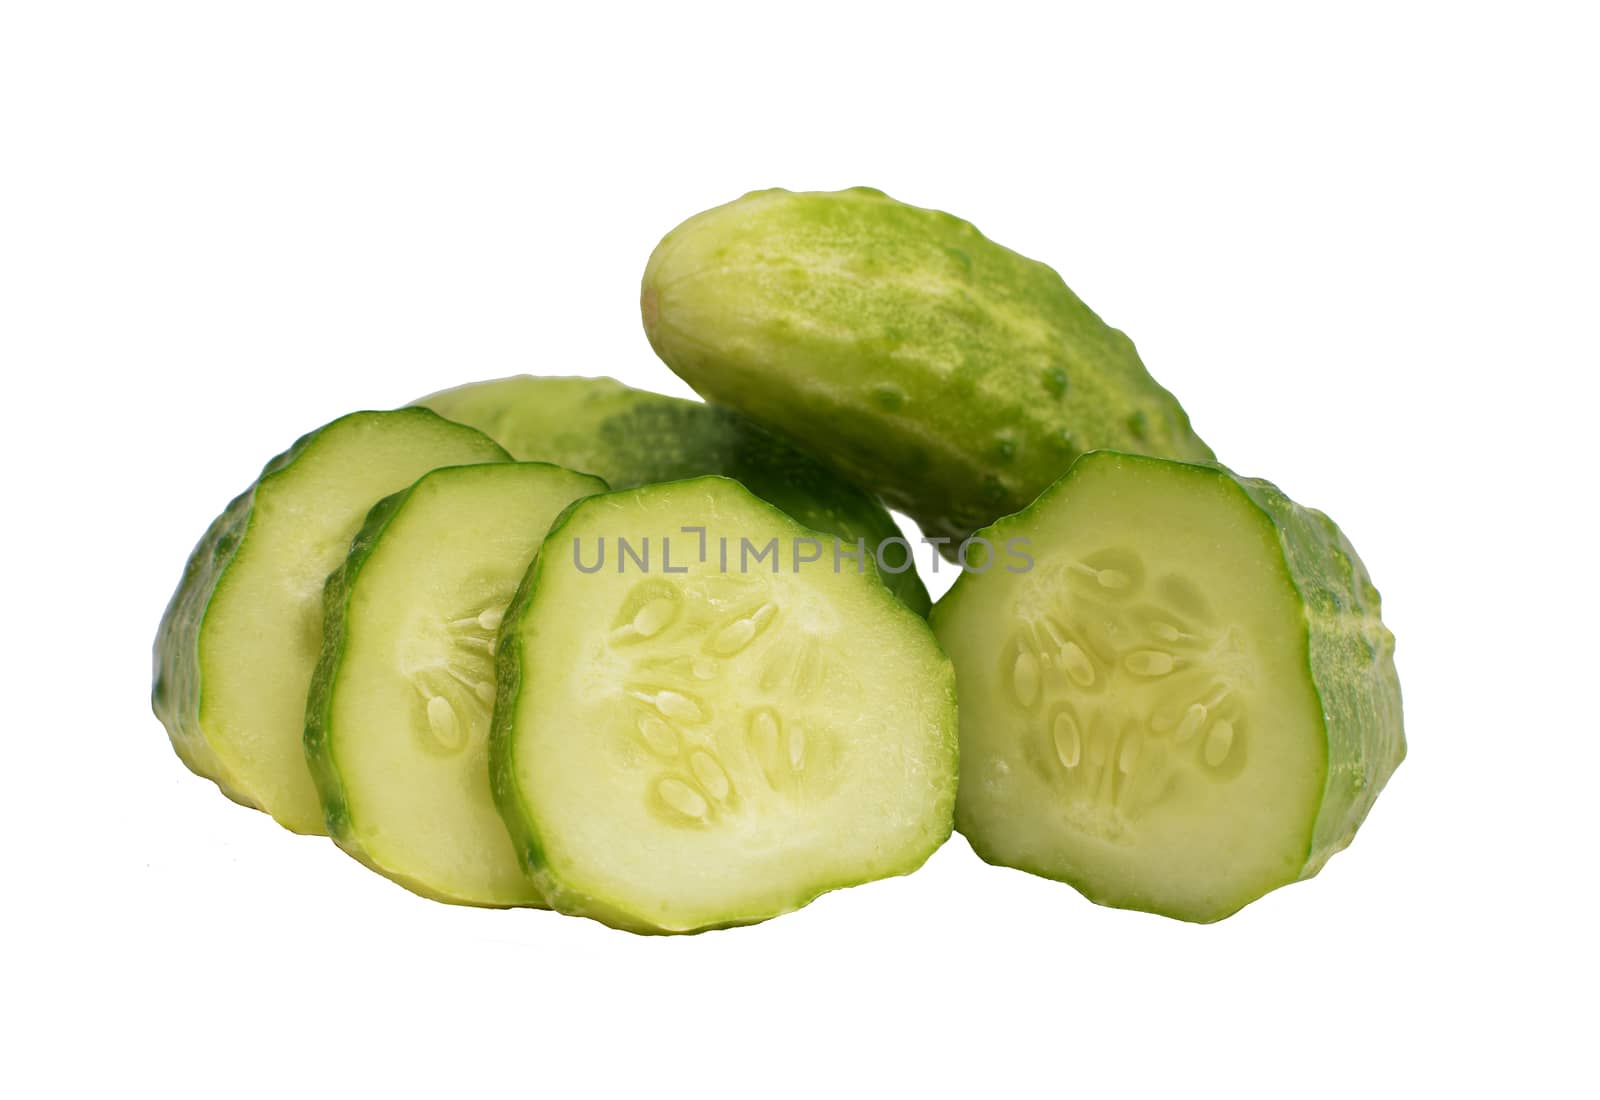 Organic cucumbers on a white background.